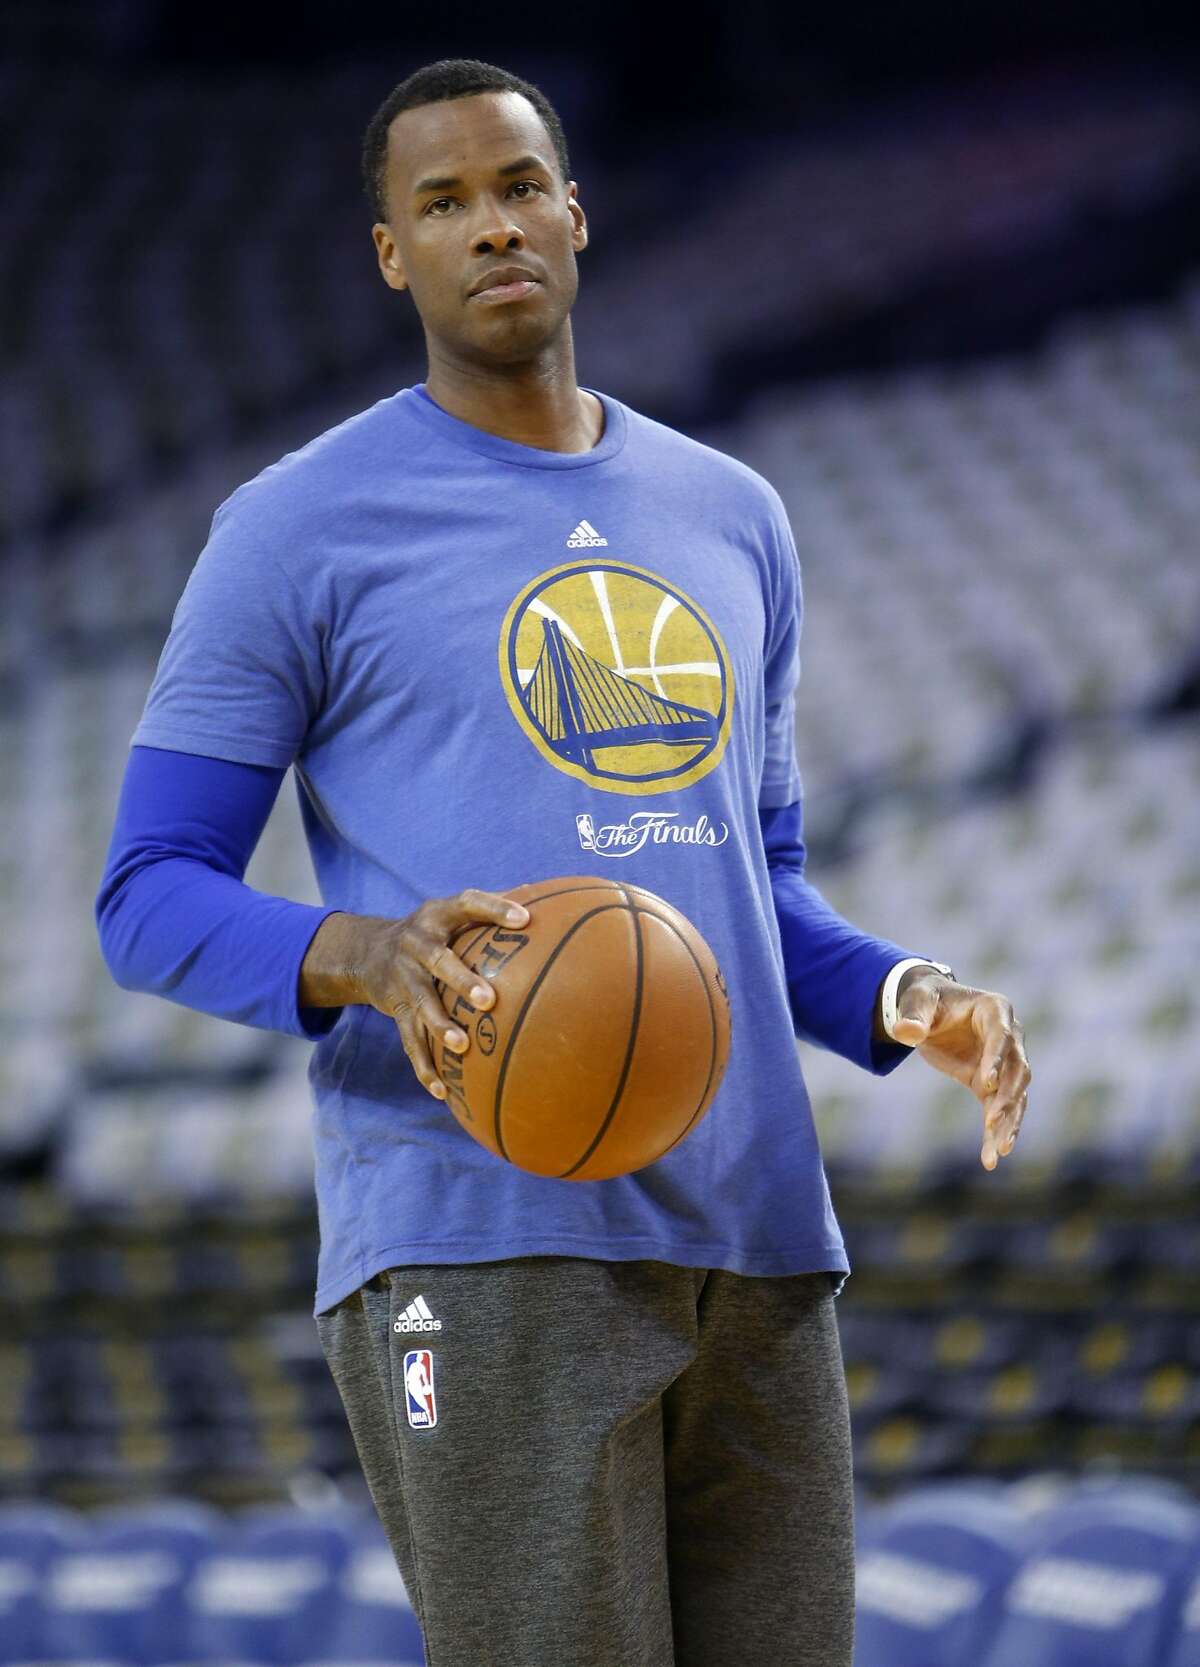 Golden State Warriors' assistant coach Jarron Collins before Warriors play New York Knicks in NBA game at Oracle Arena in Oakland, Calif., on Wednesday, March 16, 2016.